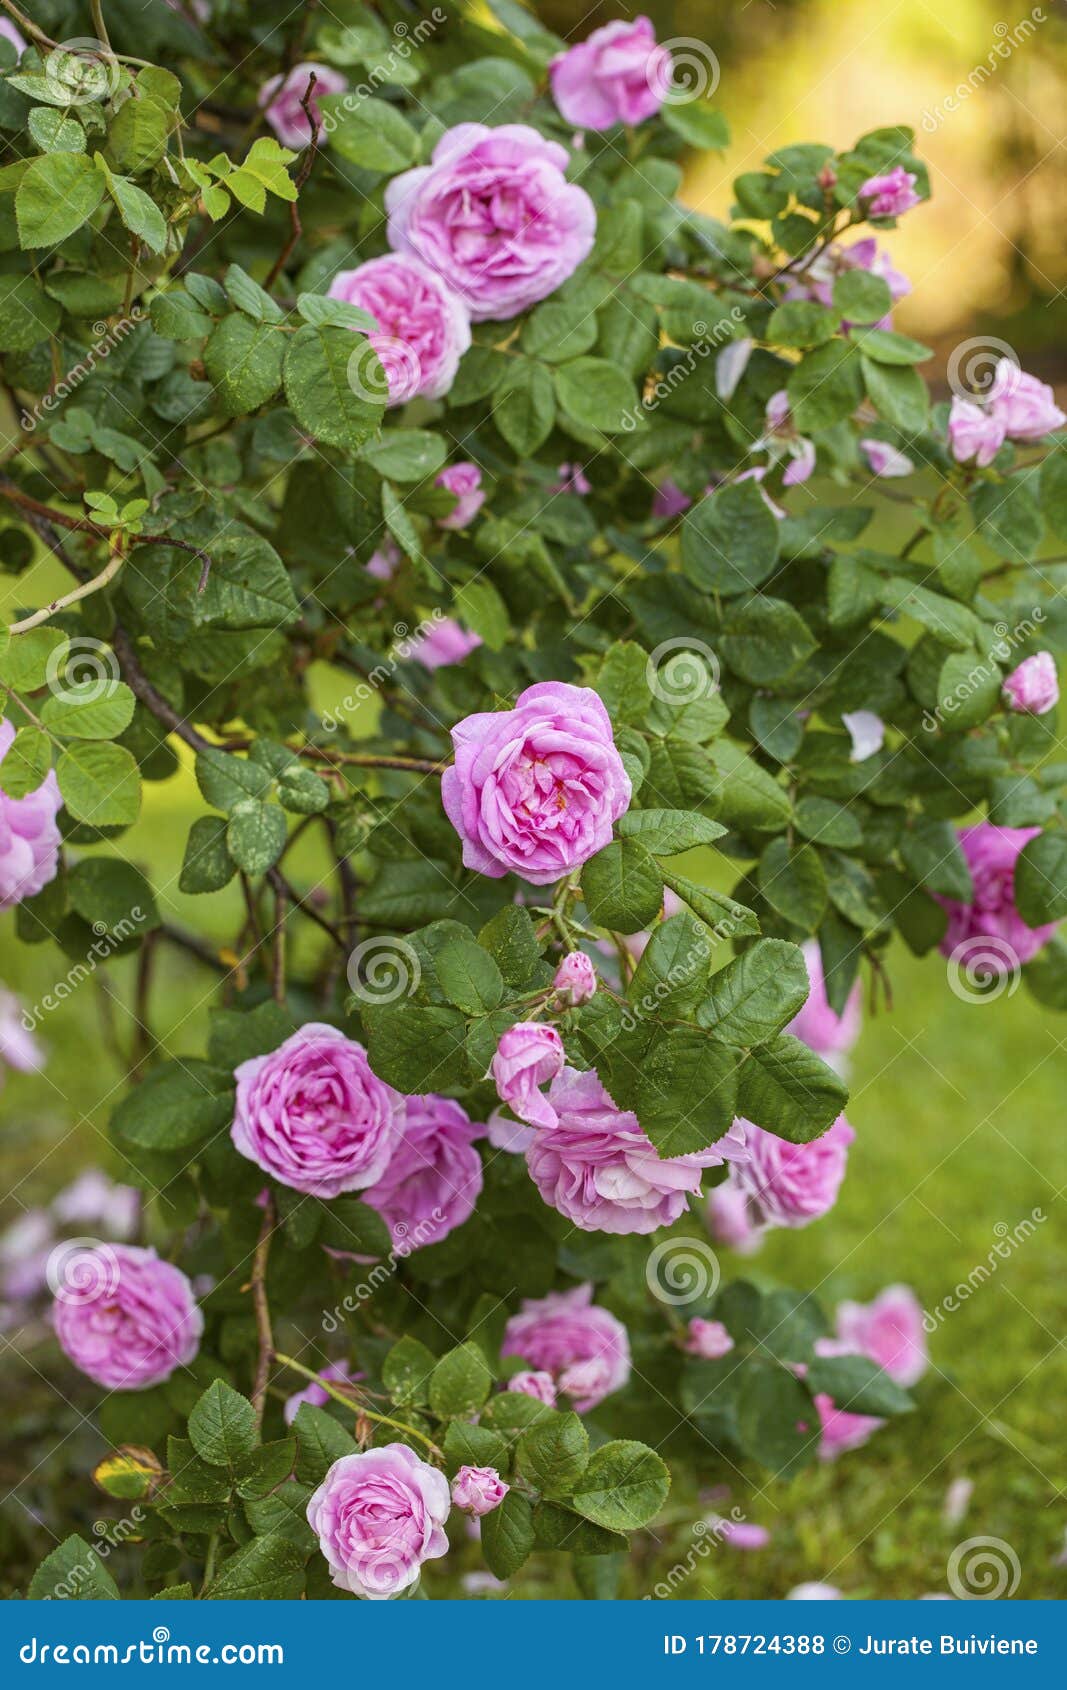 rosa centifolia foliacea the provence rose or cabbage rose is a hybrid